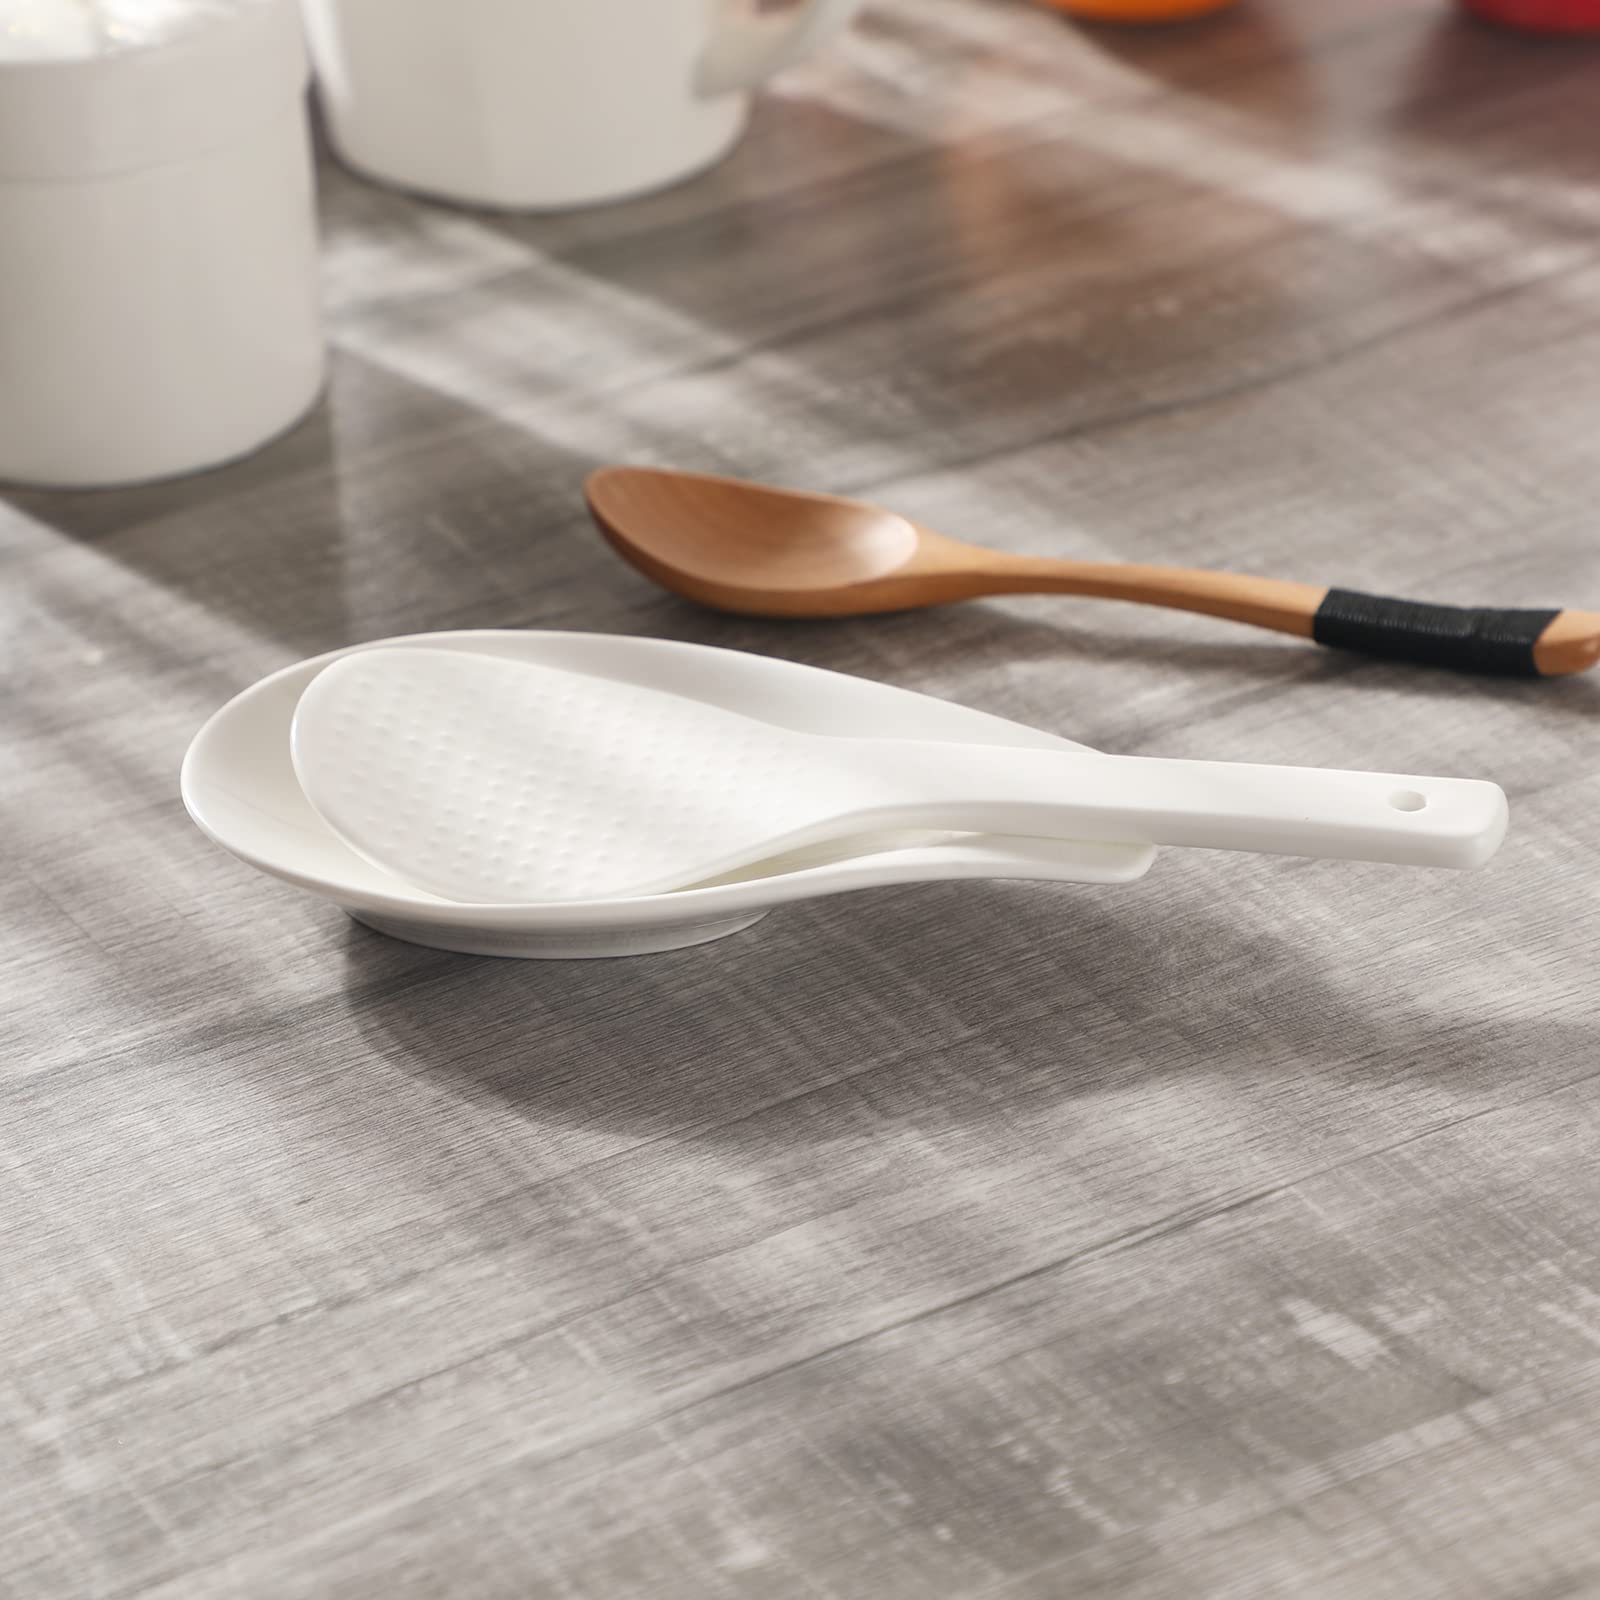 Ceramic Rice Paddle, Rice Serving spoon, 2 Pack, White